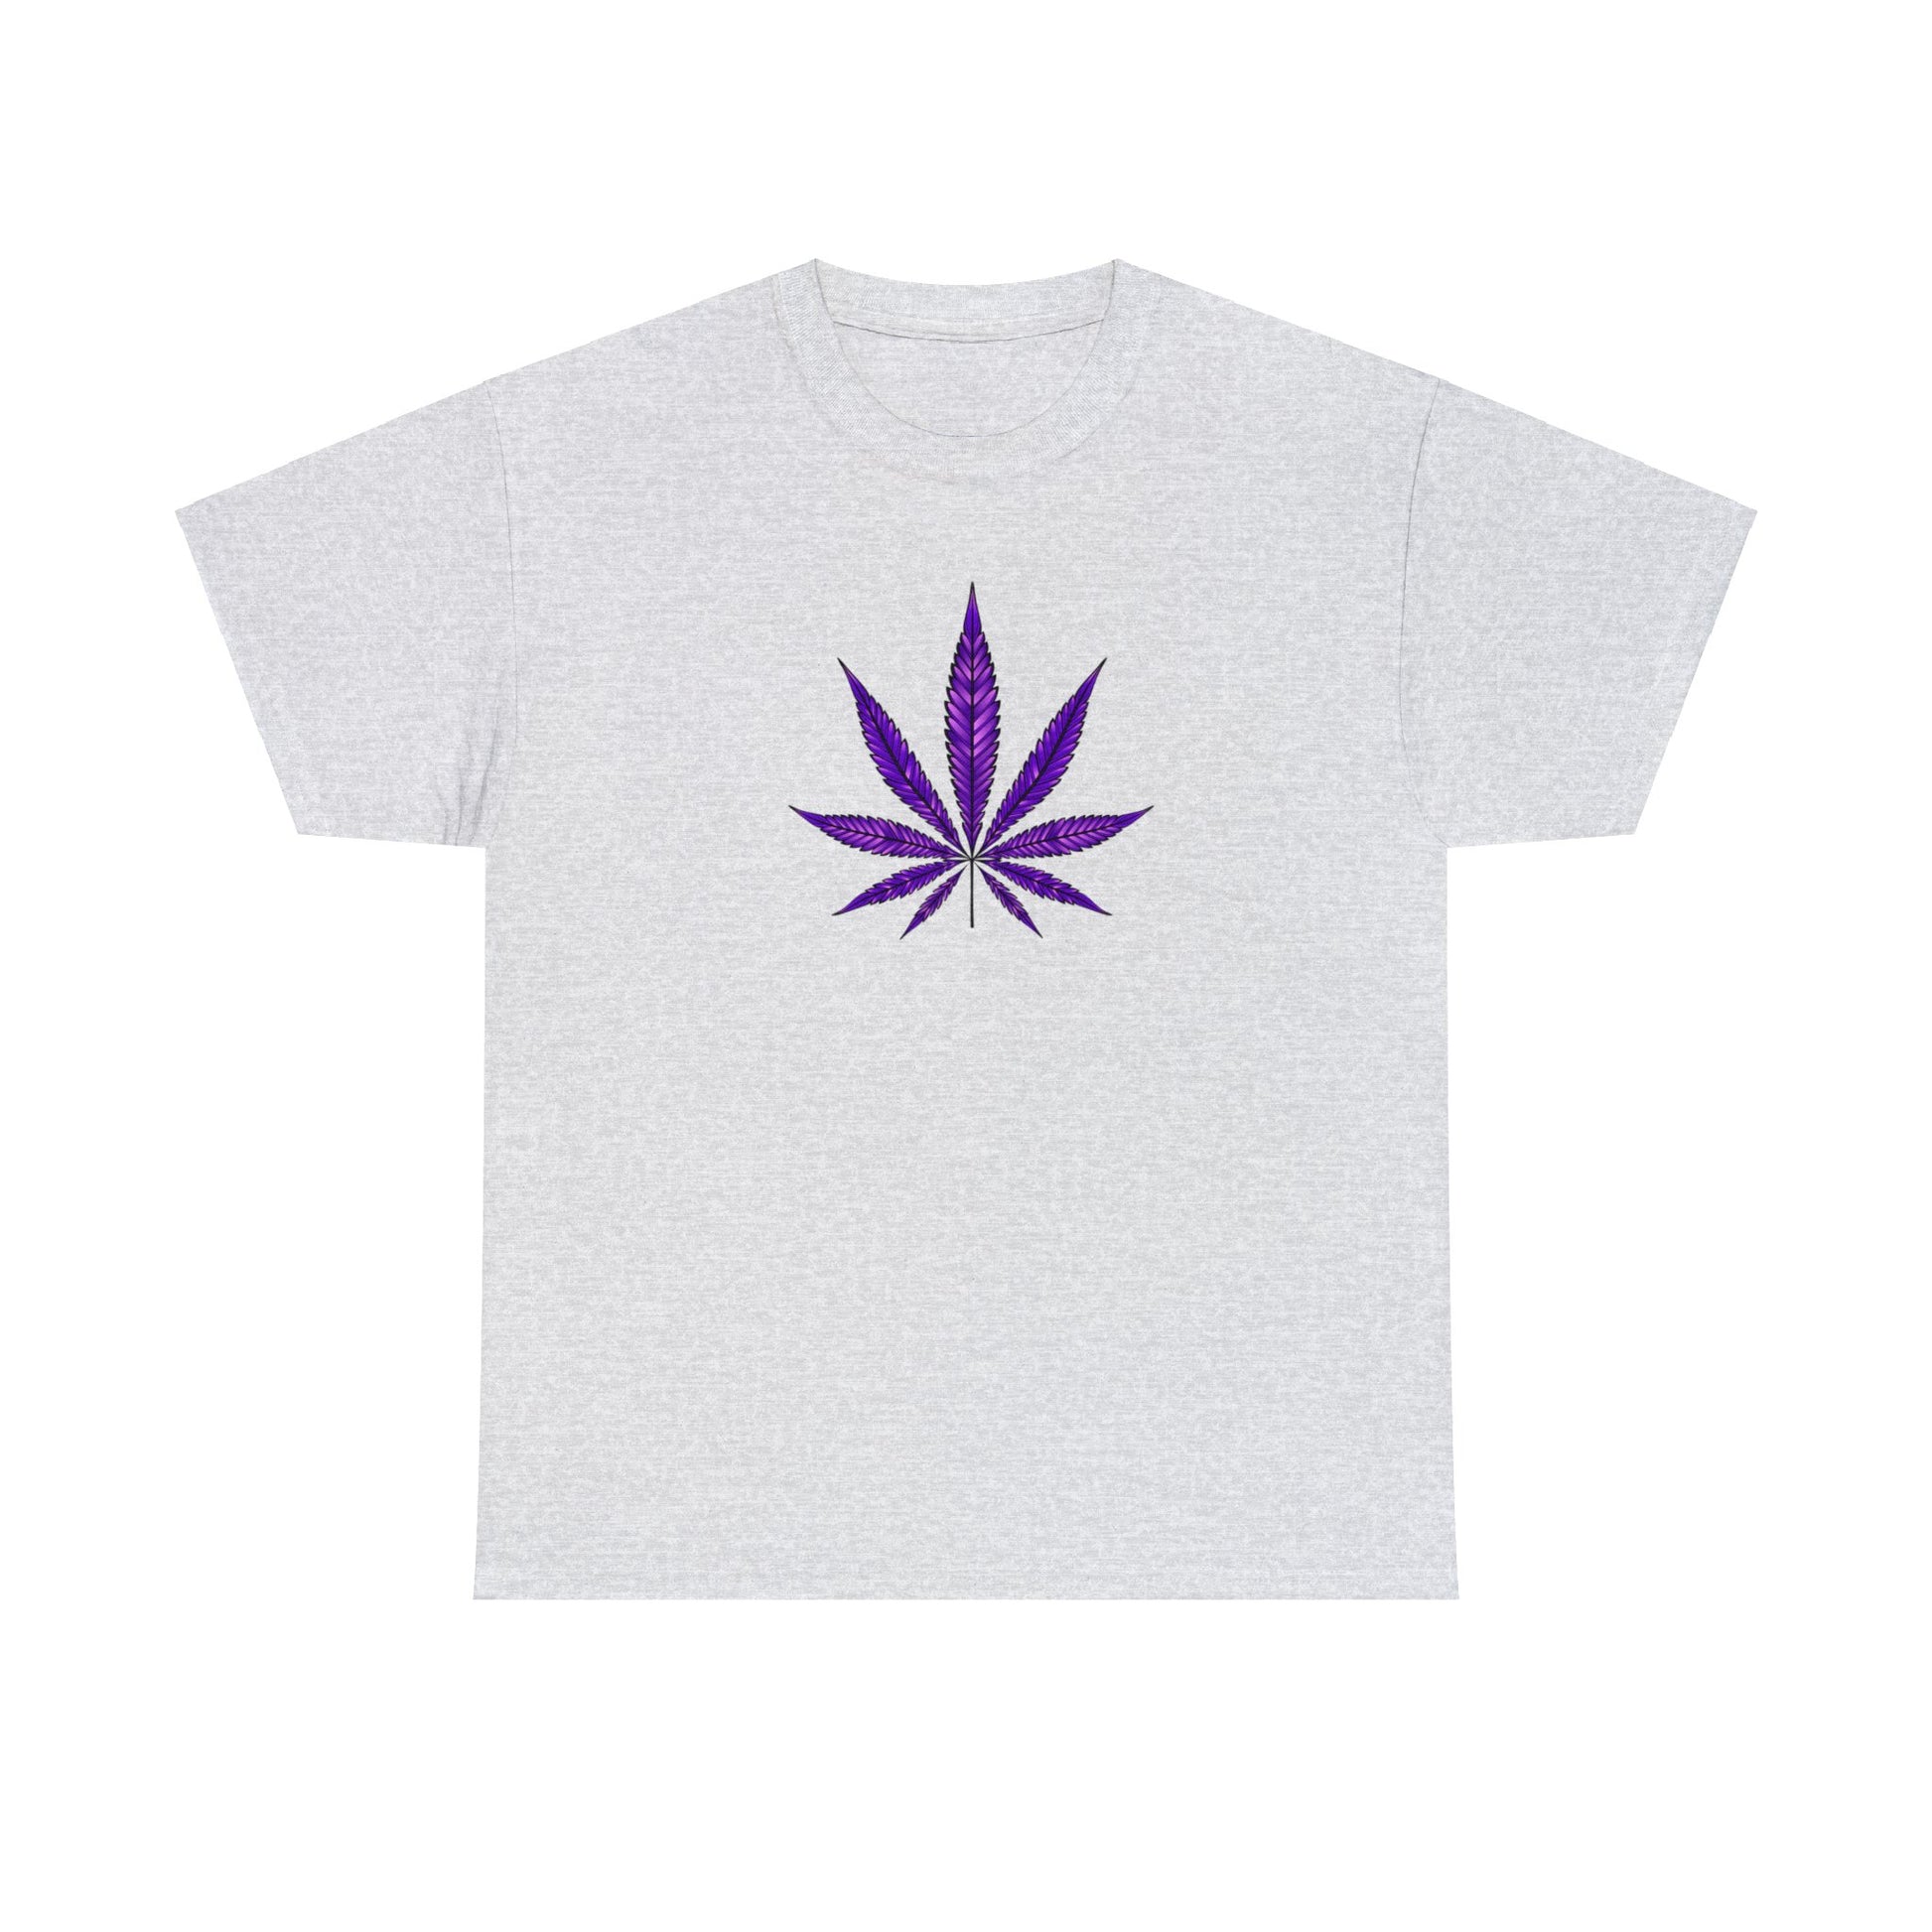 A grey tee with a Purple Cannabis Leaf Tee design on the front.